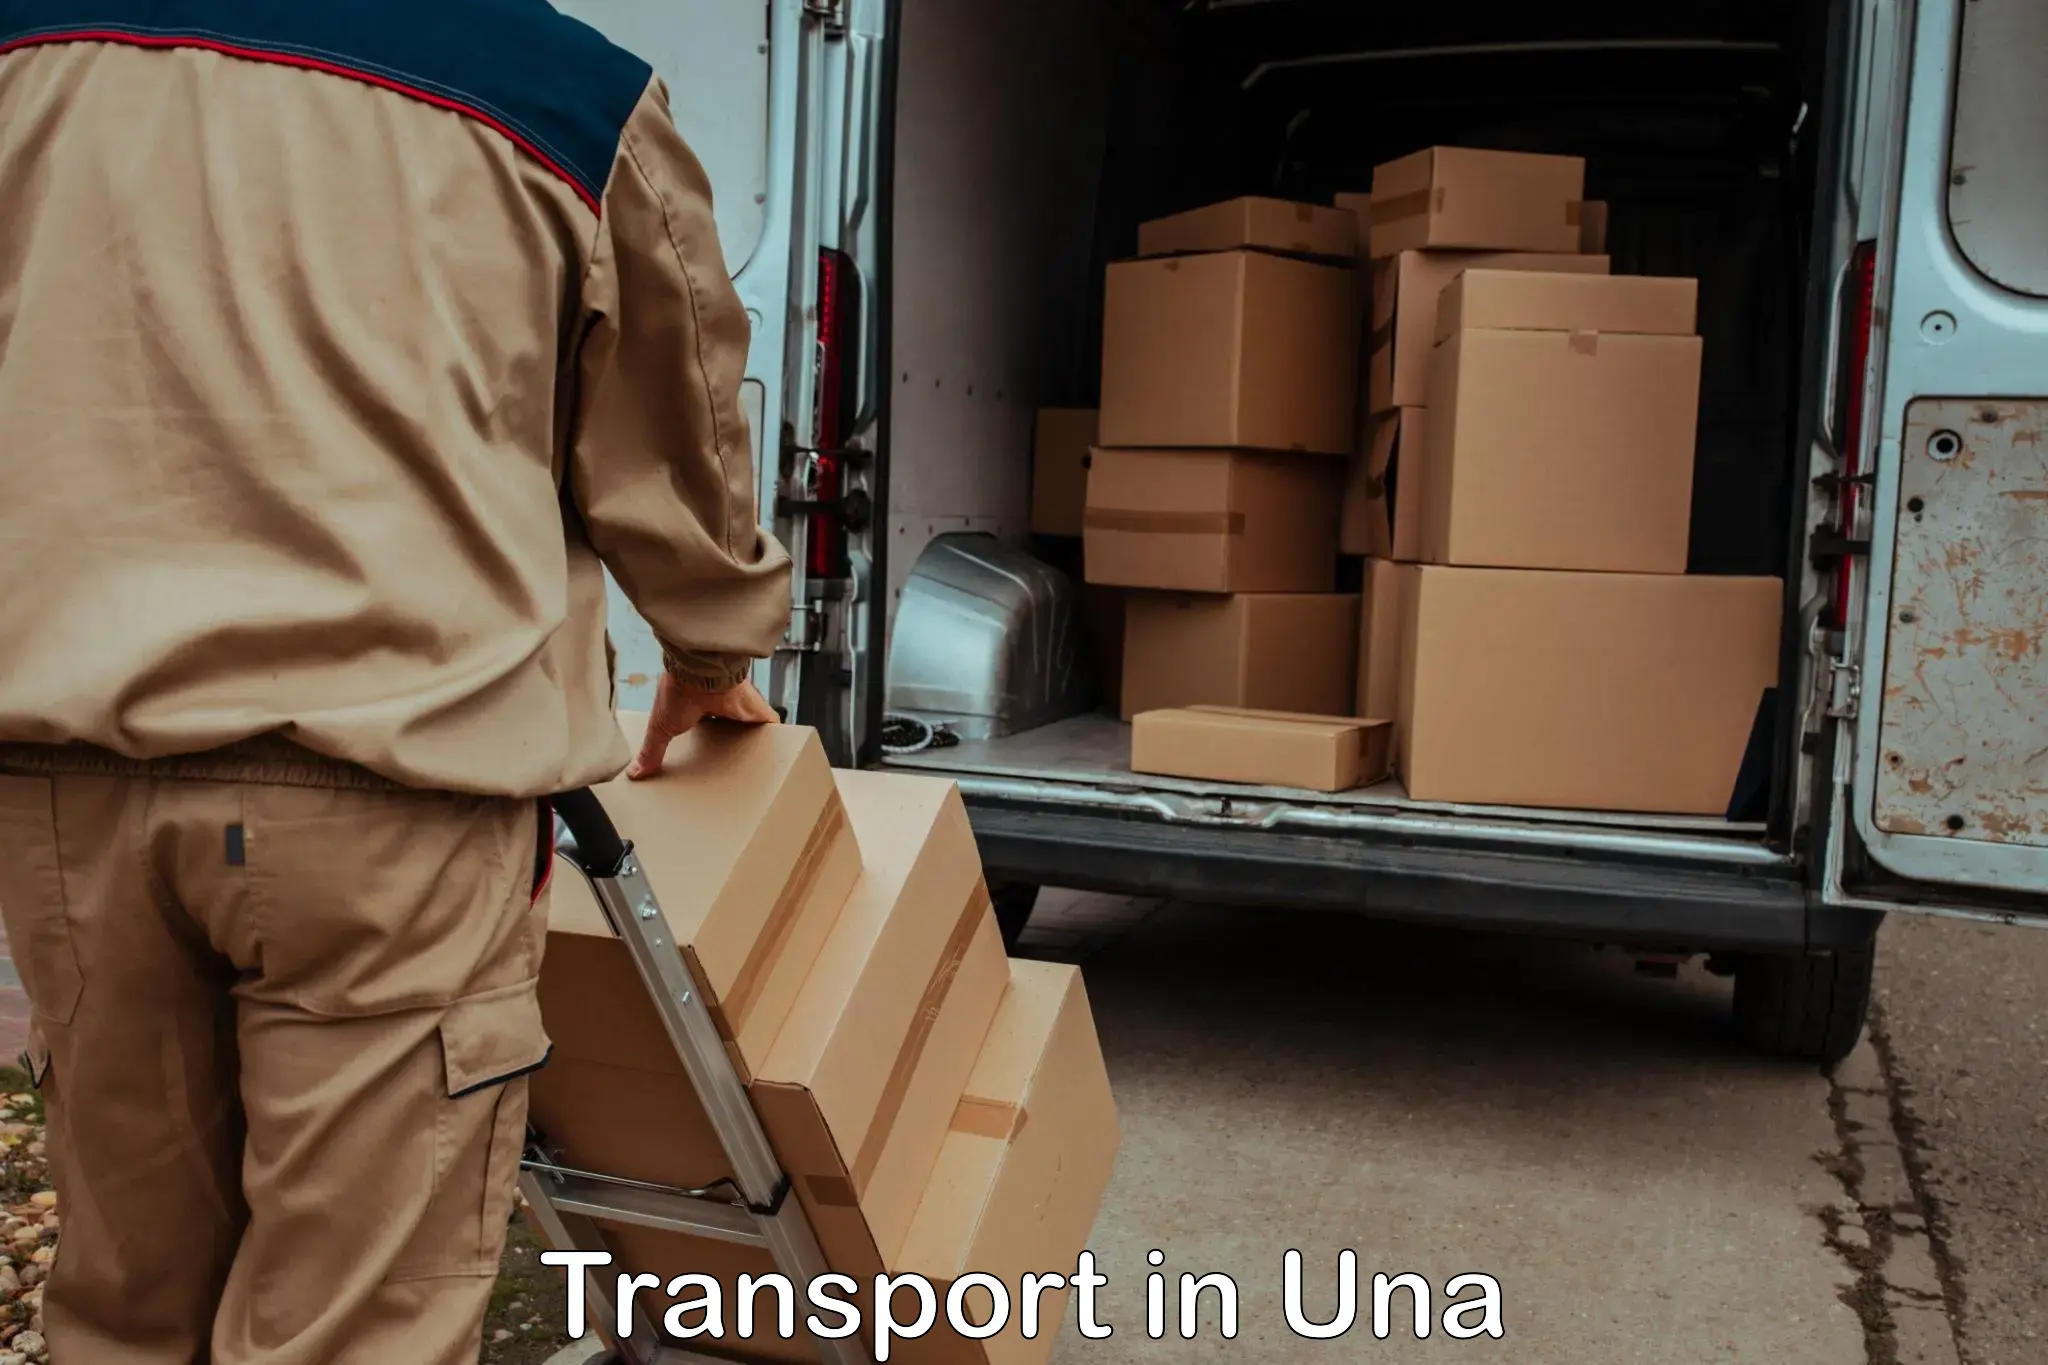 Express transport services in Una